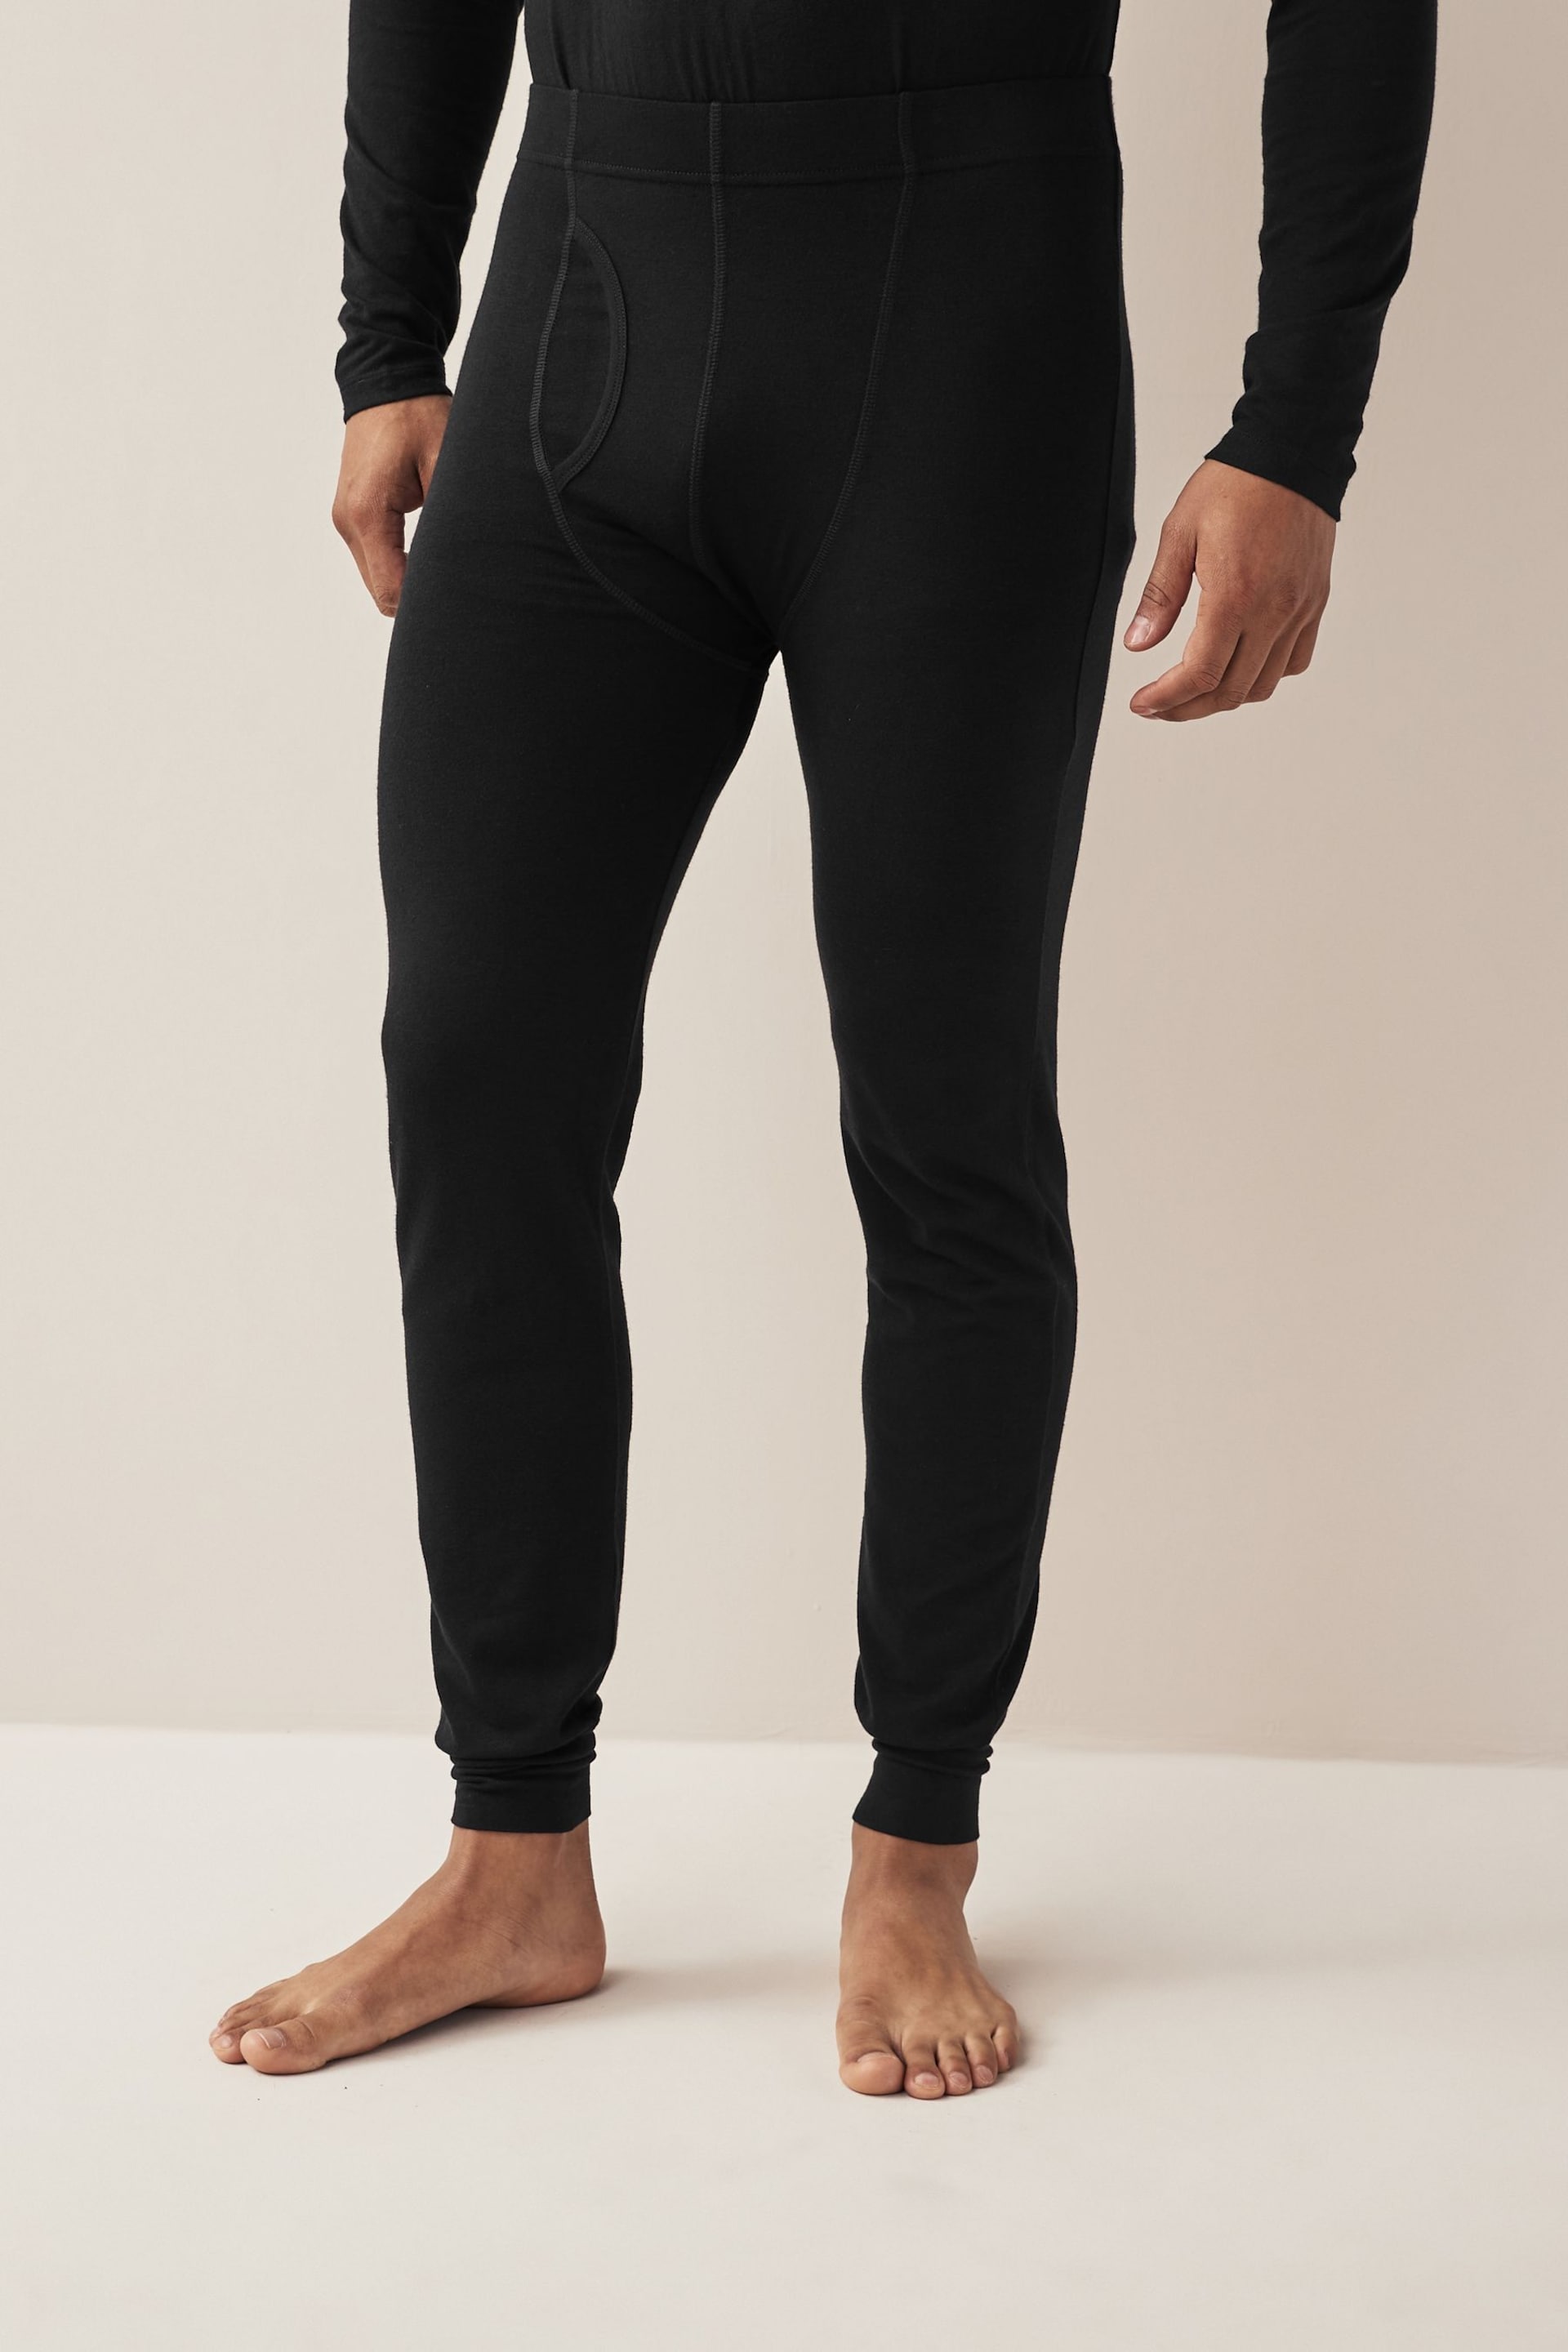 Black 2 Pack Lightweight Thermal Long Johns - Image 4 of 8